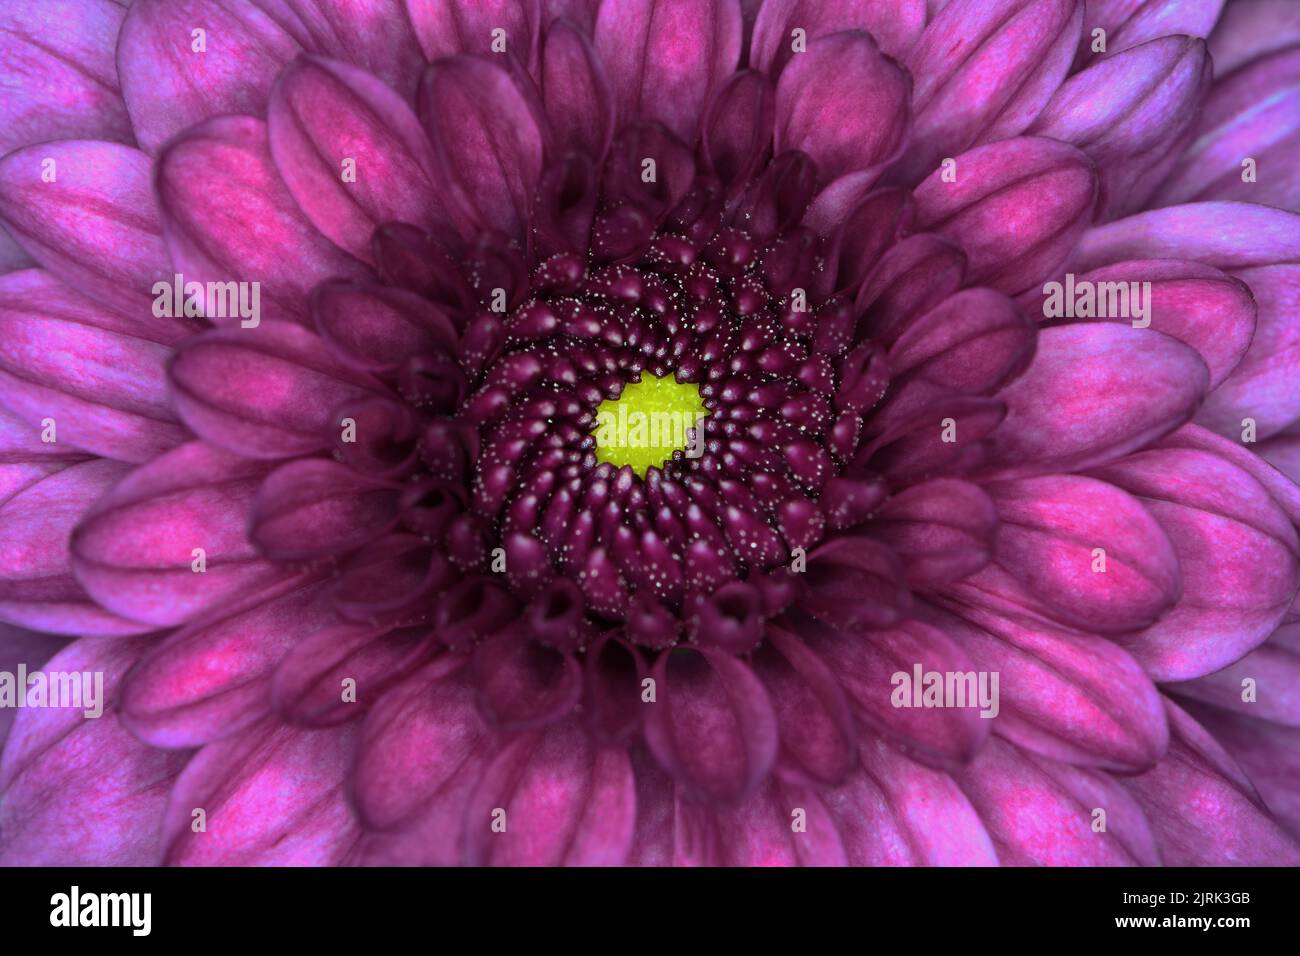 An extreme close-up of a Chrysanthemum -Asteraceae family- plum garden mum flower with a greenish yellow centre; captured in a Studio Stock Photo